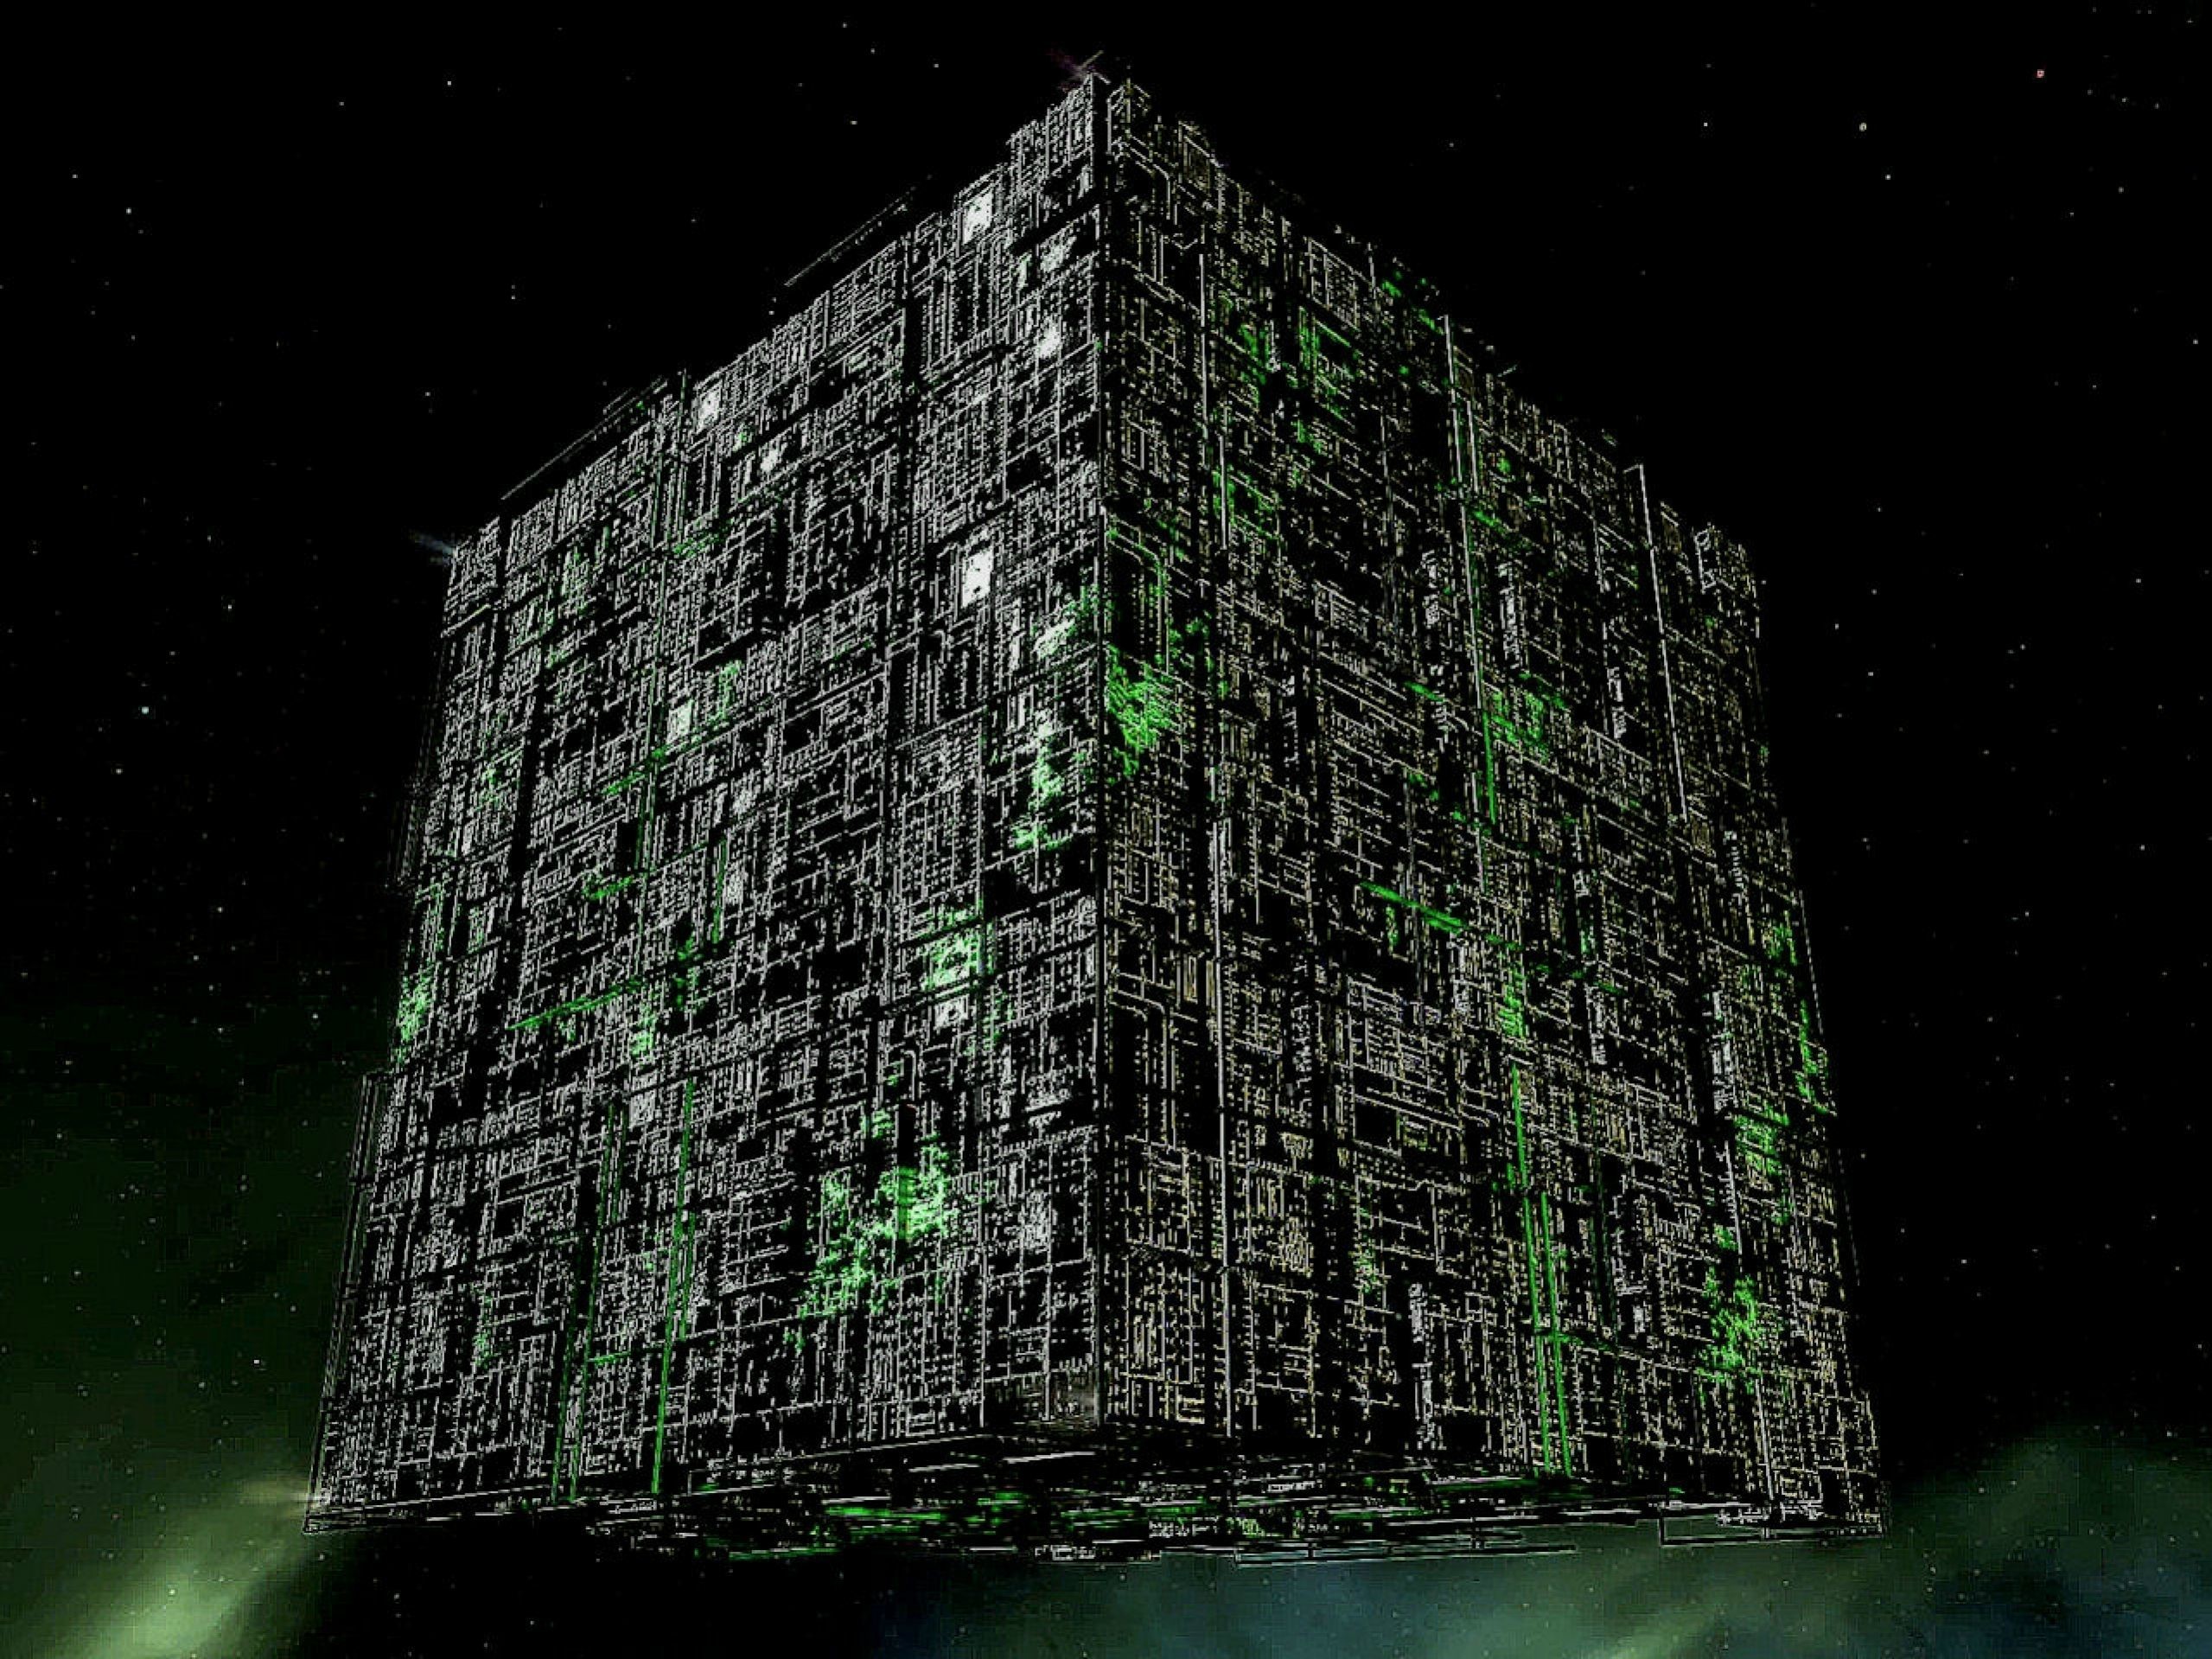 2559x1919 We are the Borg. Lower your shields and surrender your ships. We will add  your biological and technological distinctiveness to our own.